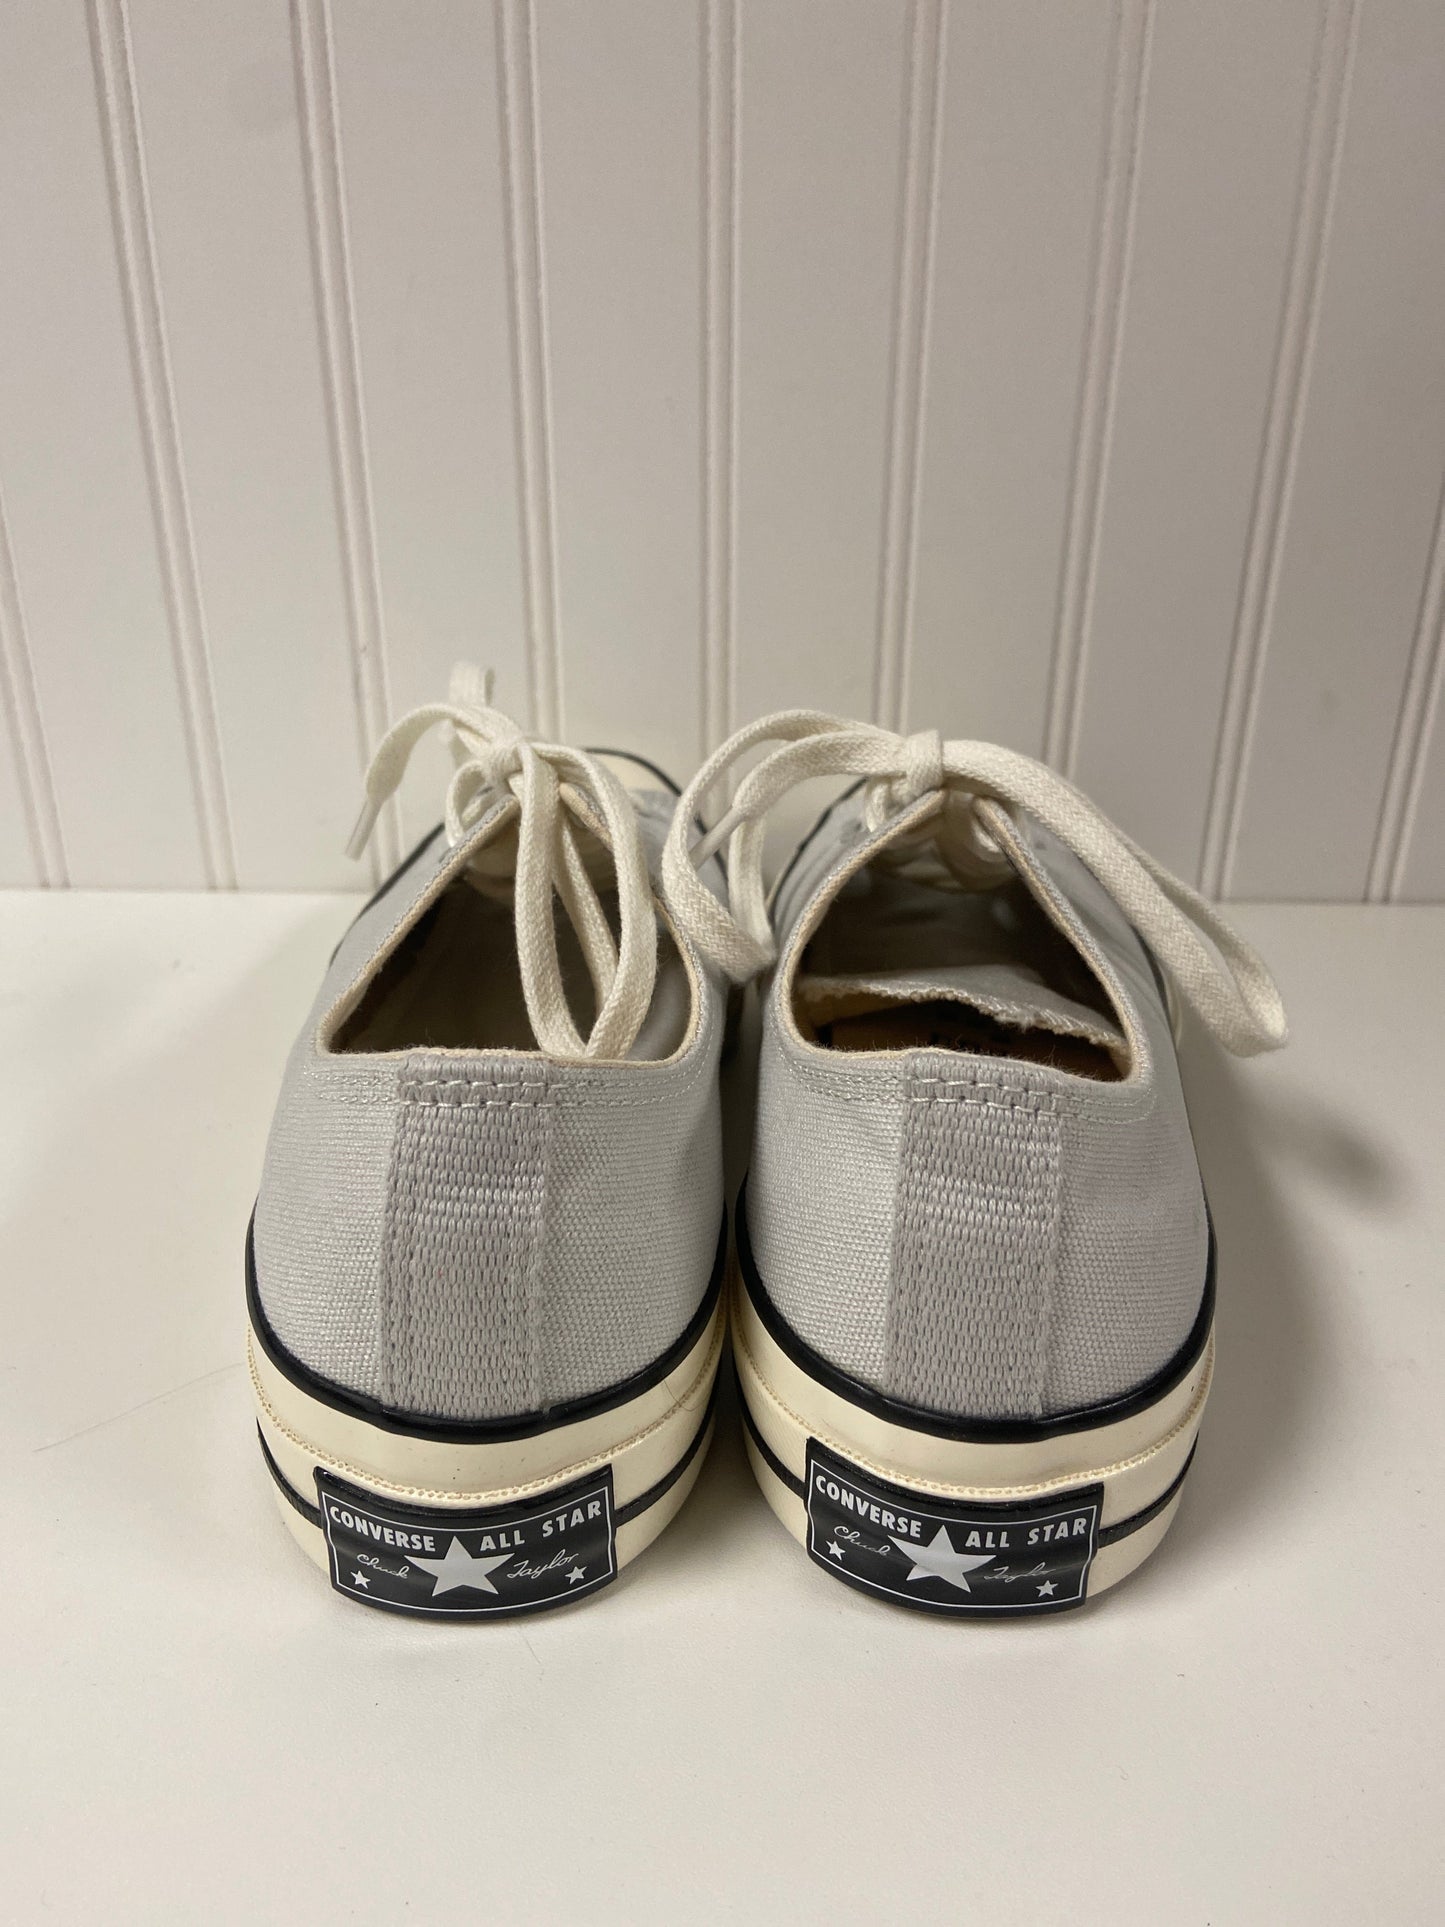 Grey Shoes Sneakers Converse, Size 8.5